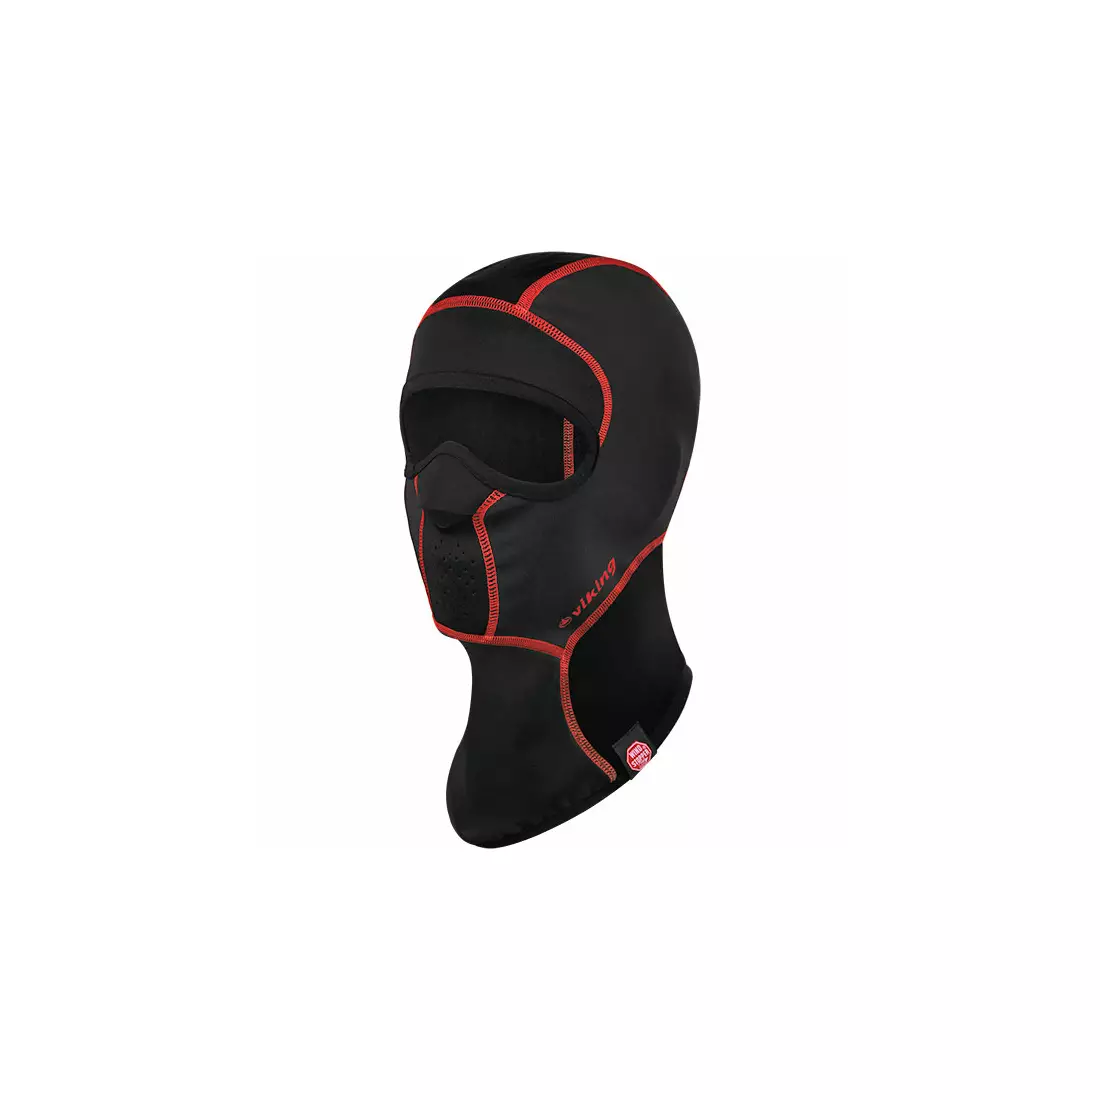 VIKING Gore Windstopper windproof balaclava, black and red seams